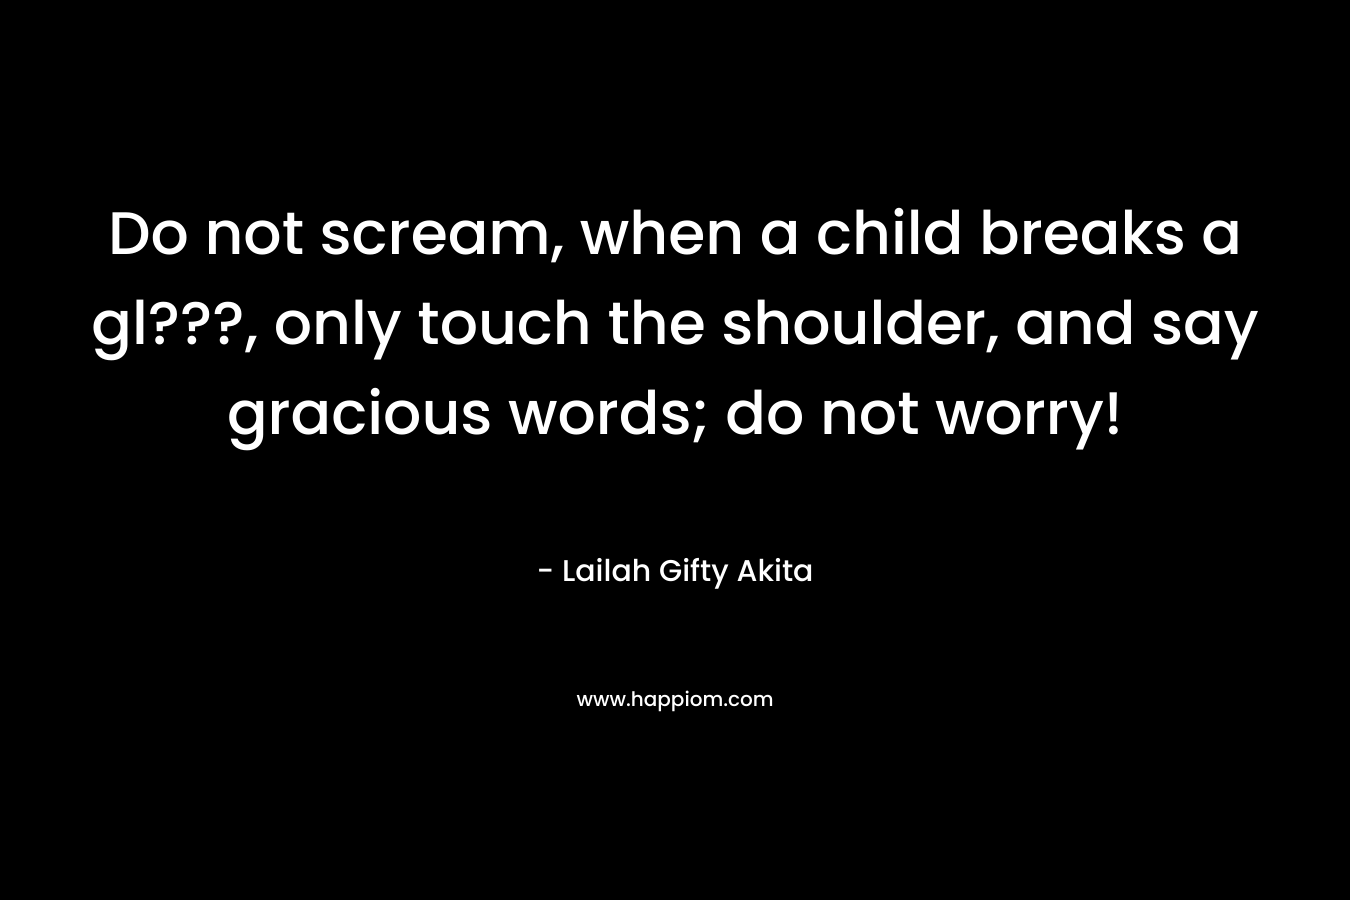 Do not scream, when a child breaks a gl???, only touch the shoulder, and say gracious words; do not worry!